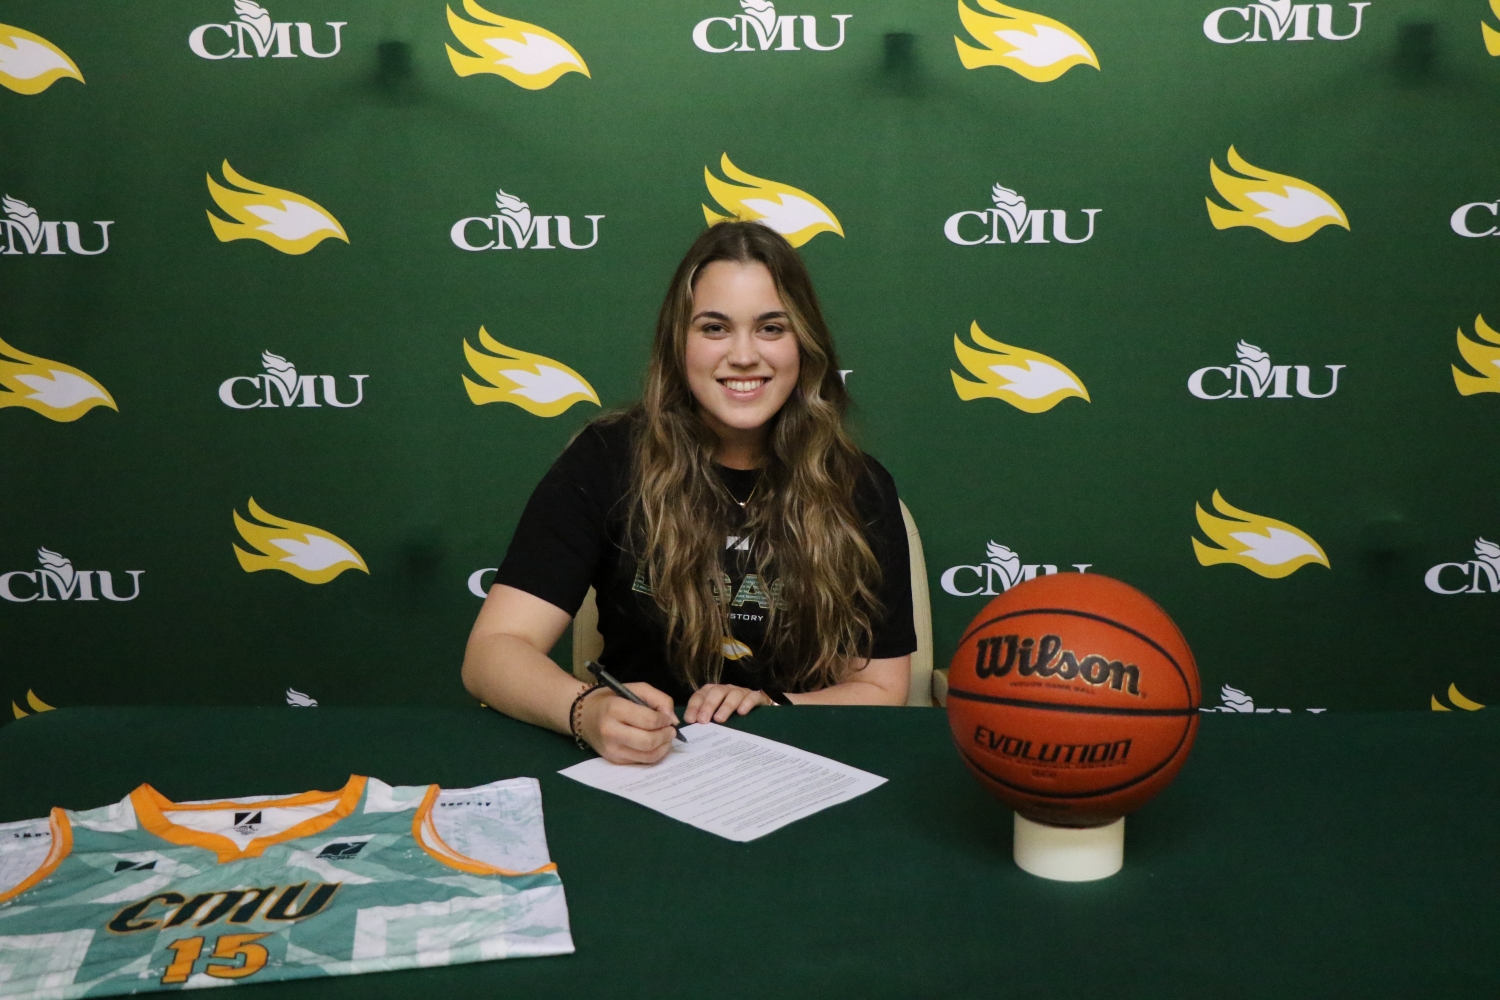 From the Raiders to the Blazers: Women's Basketball Sign Local Forward